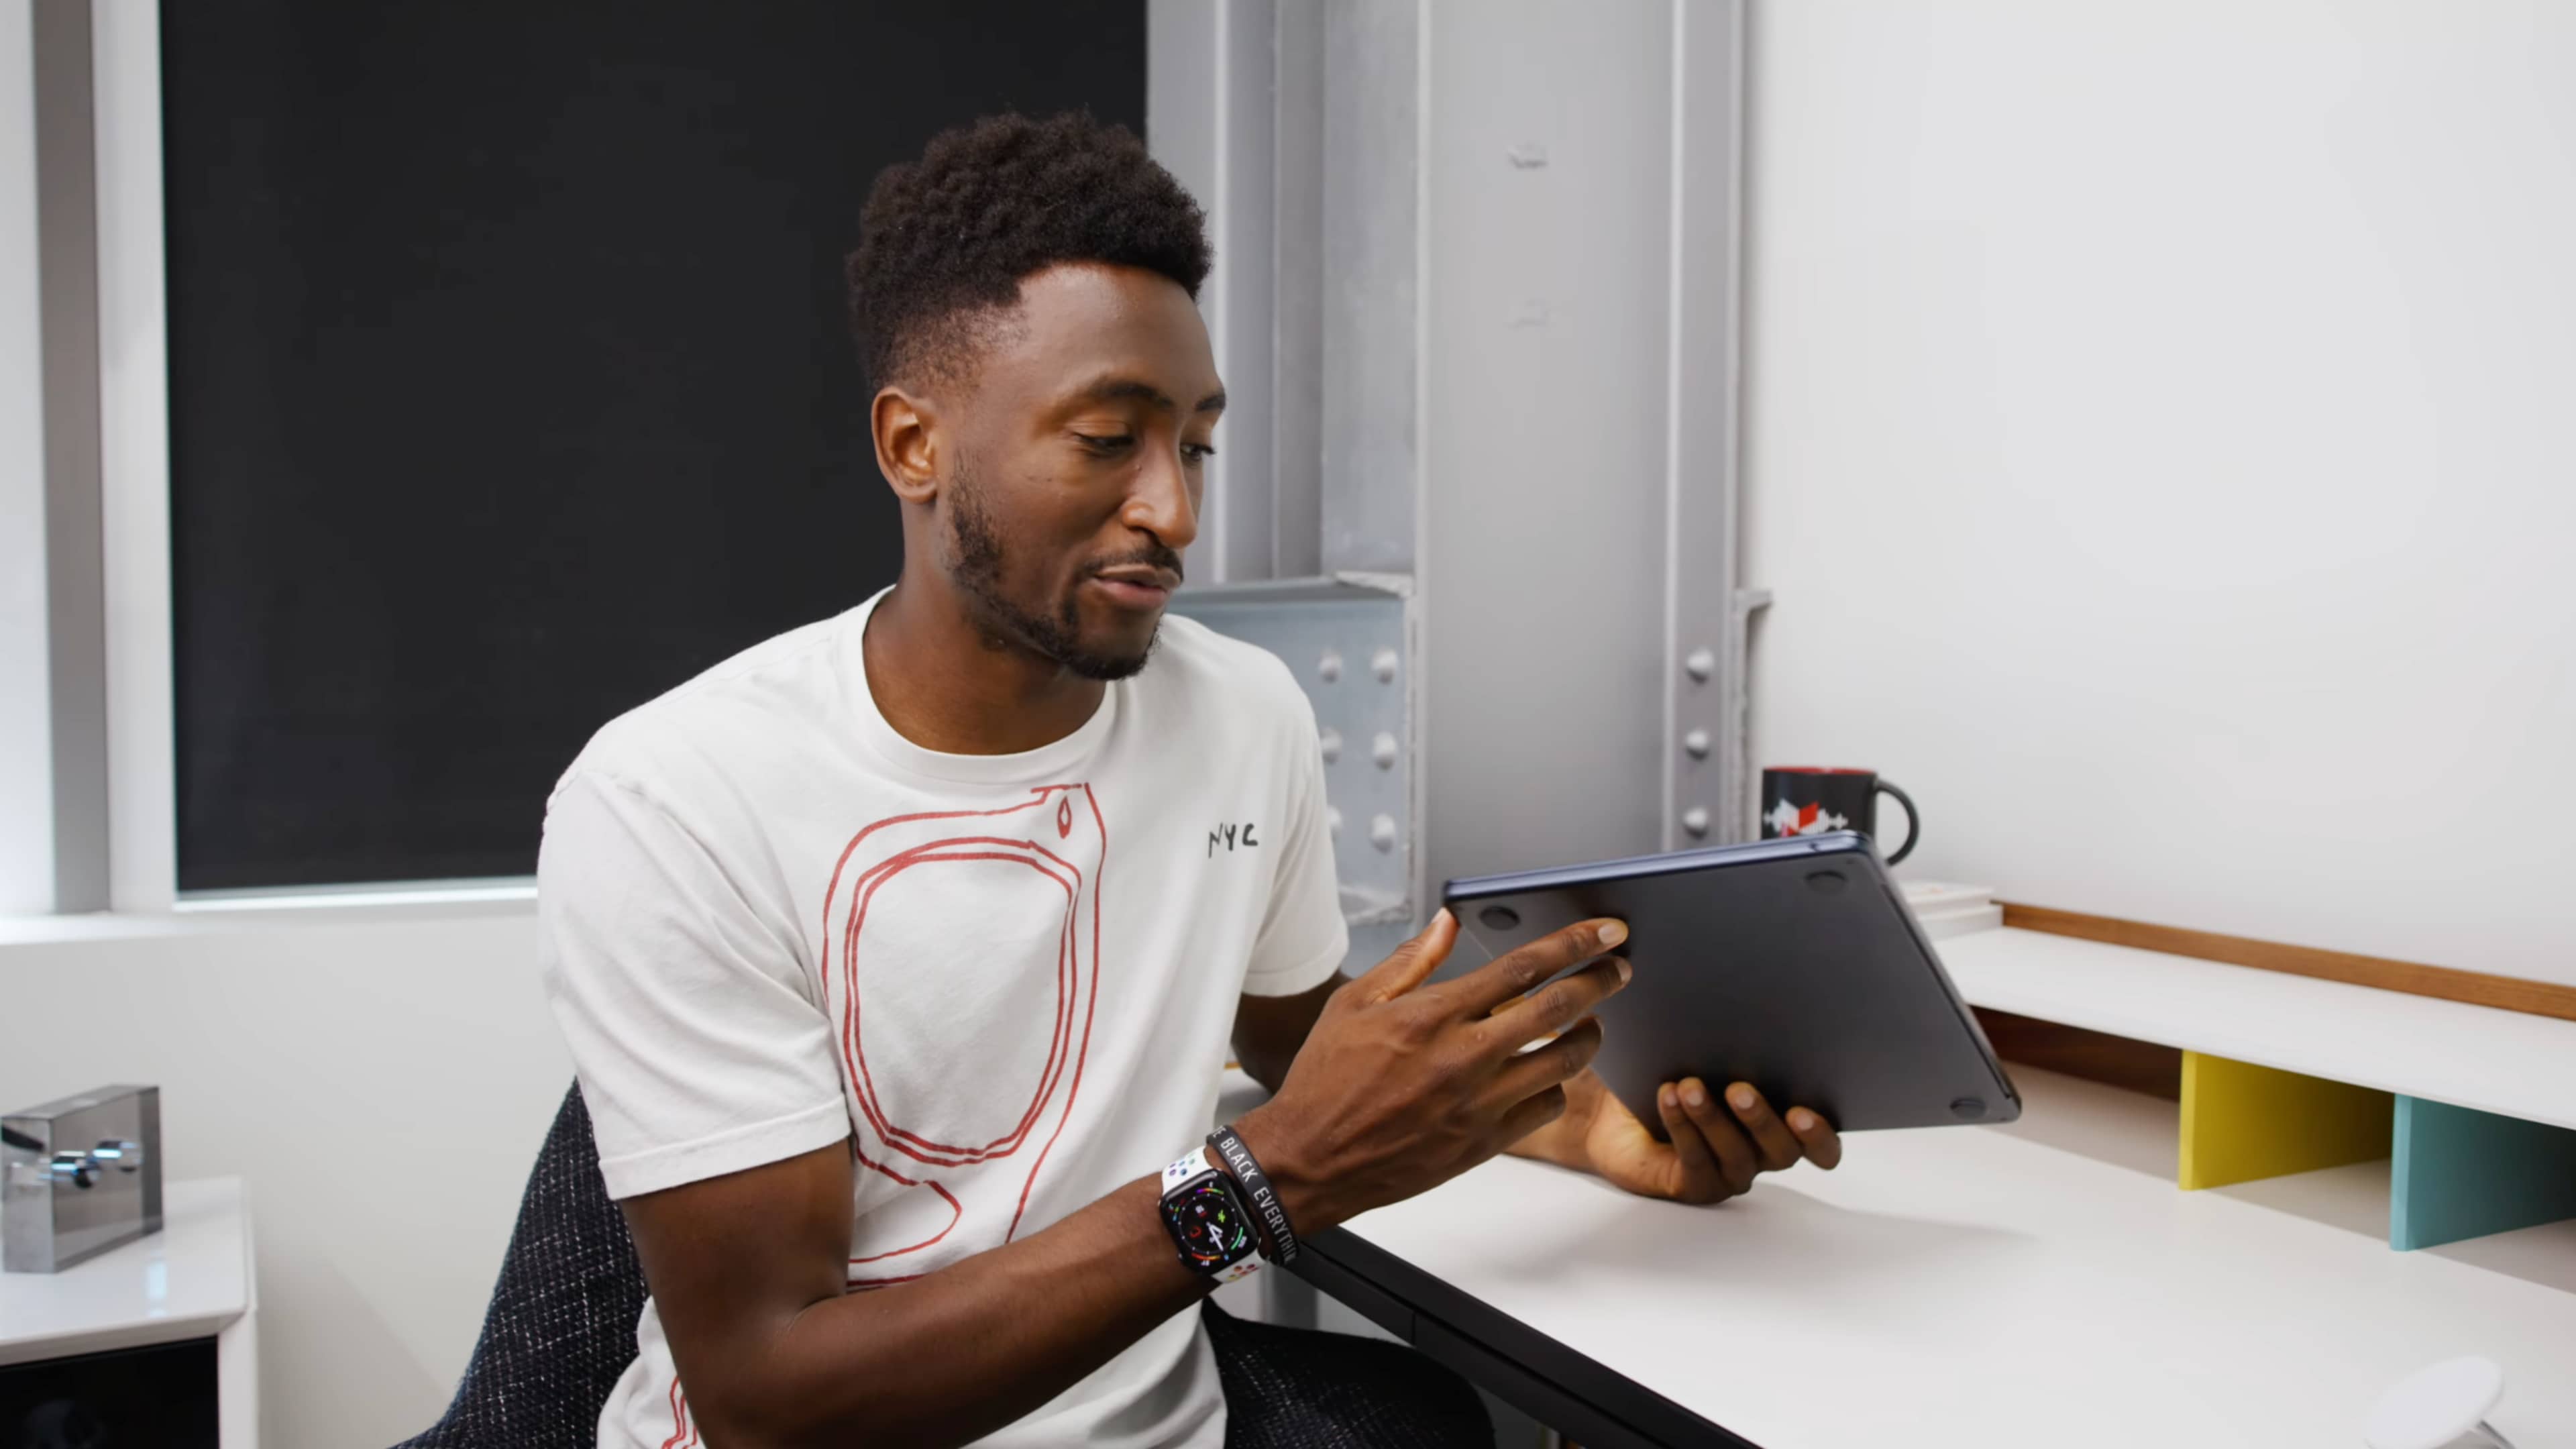 YouTuber Marques Brownlee is in his studio, holding Apple's MacBook Air laptop in the Midnight color and inspecting the nicks around USB-C ports